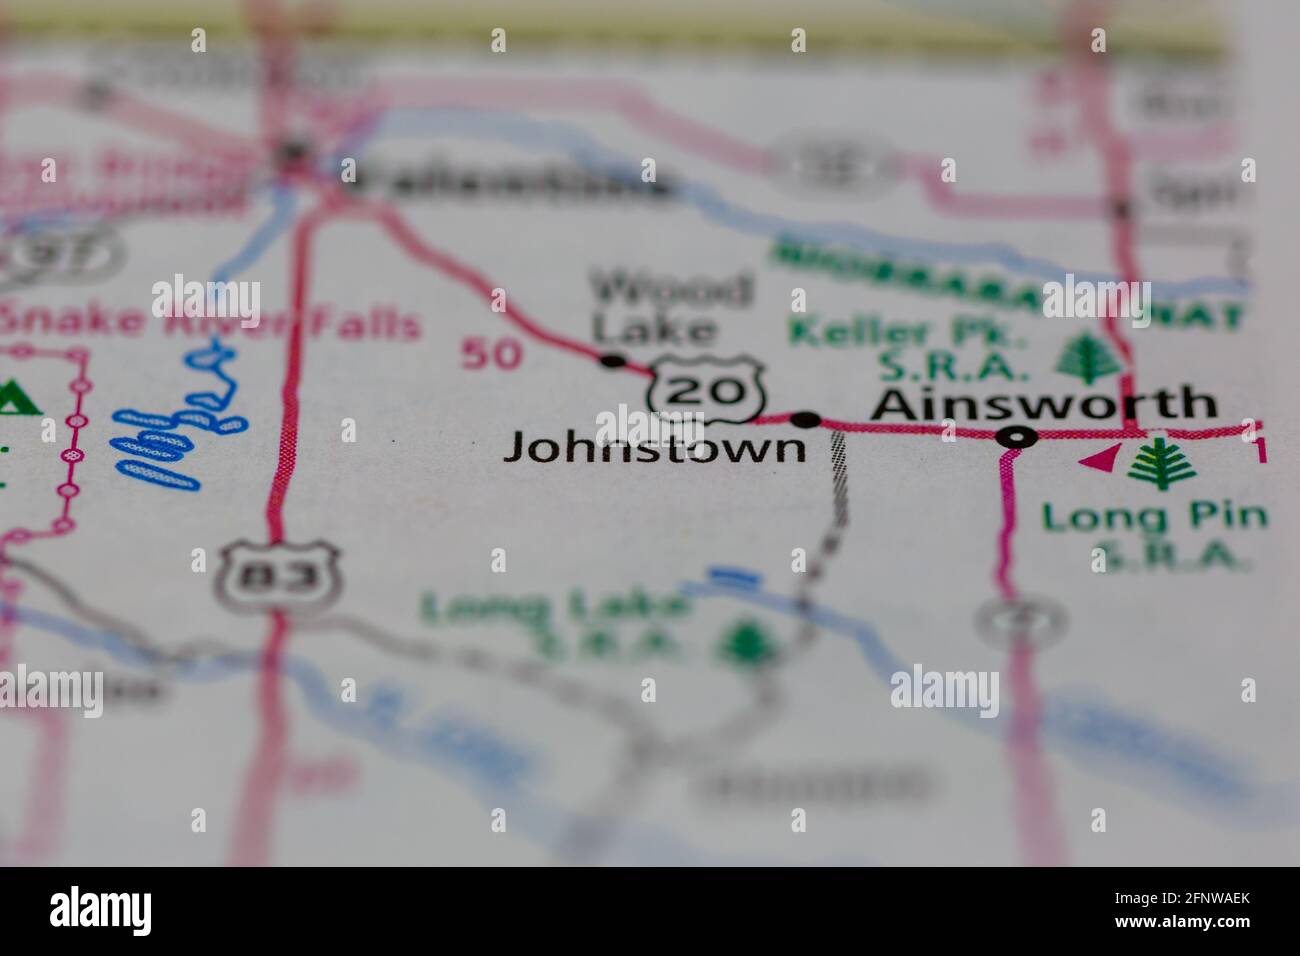 Johnstown Nebraska USA Shown on a Geography map or Road map Stock Photo